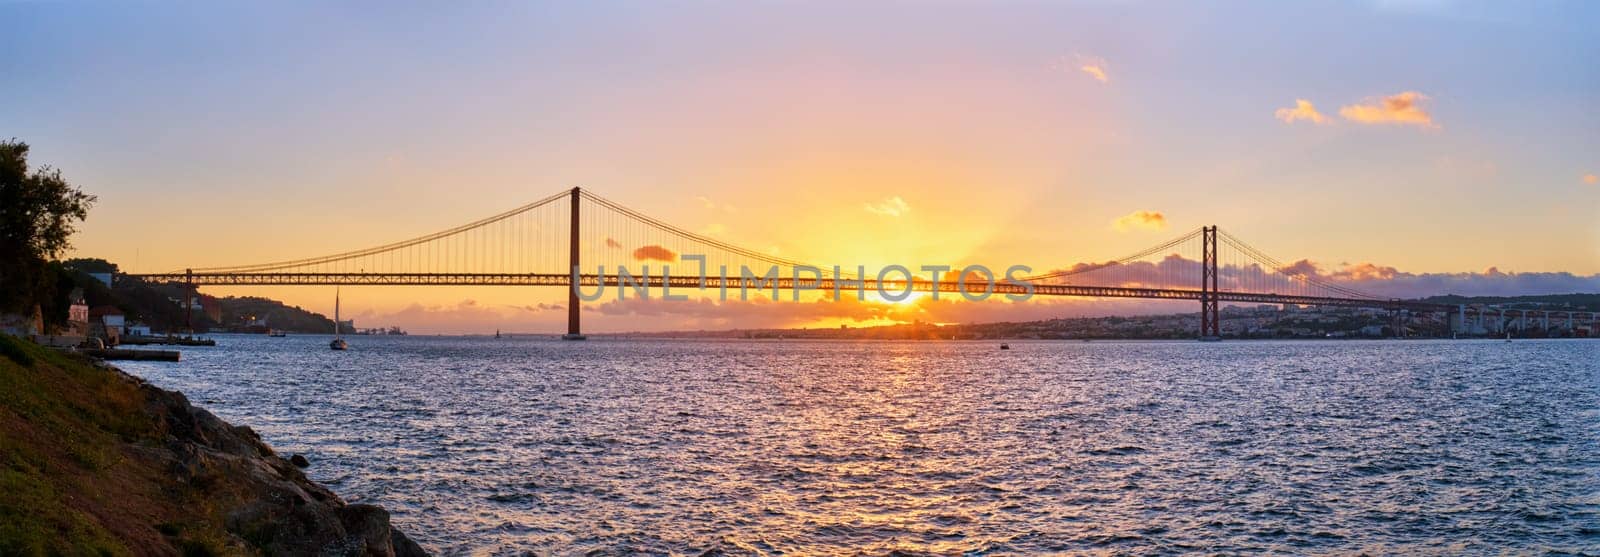 Panorama of 25 de Abril Bridge over Tagus river on sunset. Lisbon, Portugal by dimol